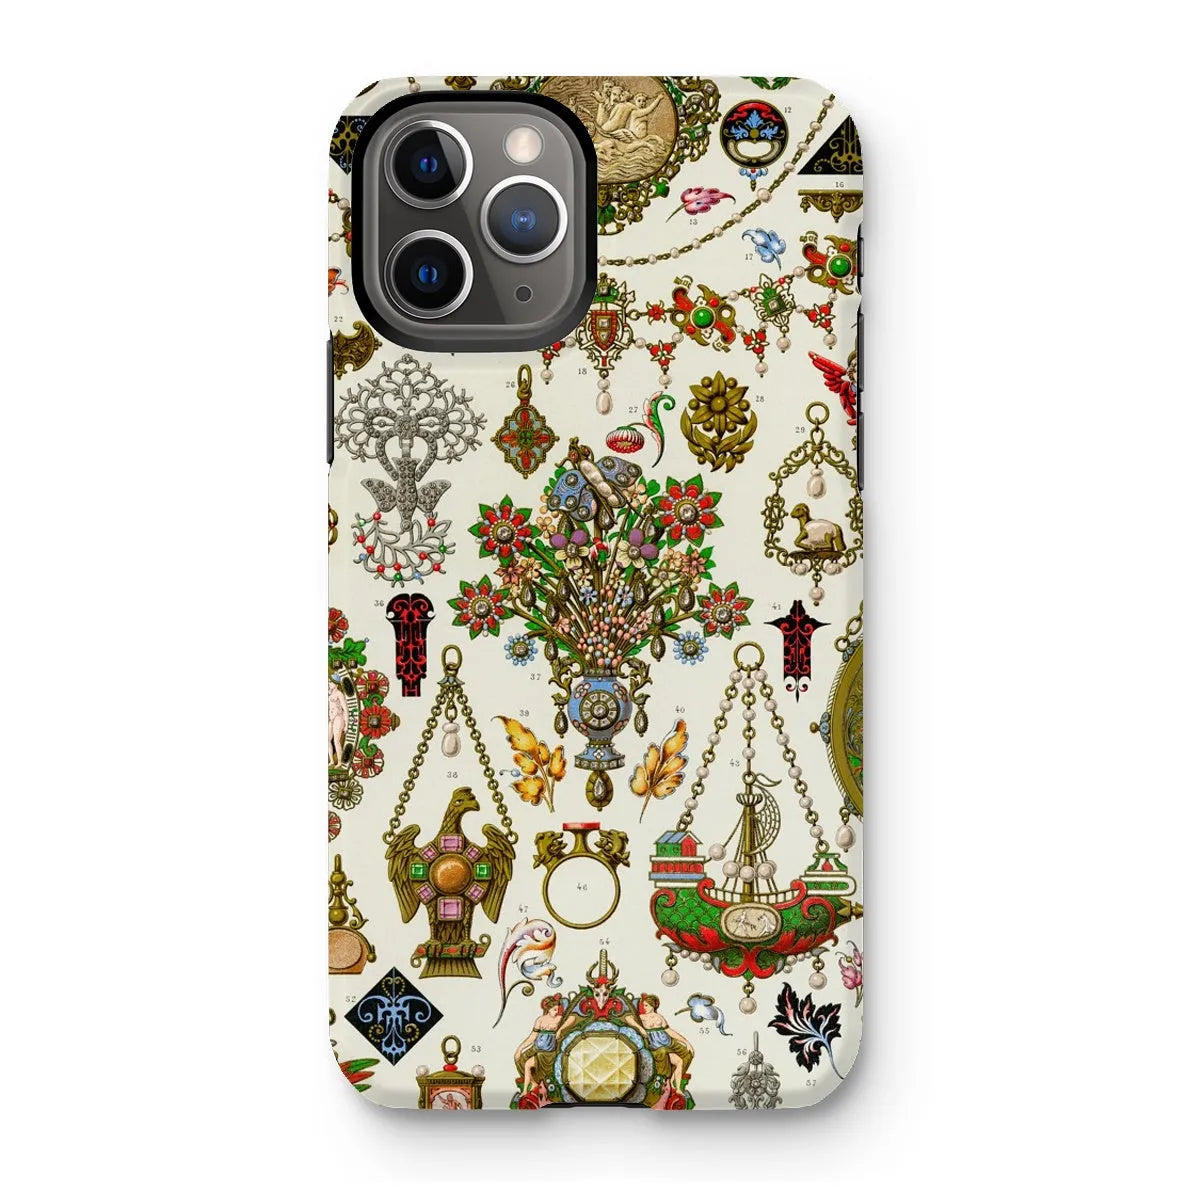 French Jewelry By Auguste Racinet Tough Phone Case - Iphone 11 Pro / Matte - Mobile Phone Cases - Aesthetic Art